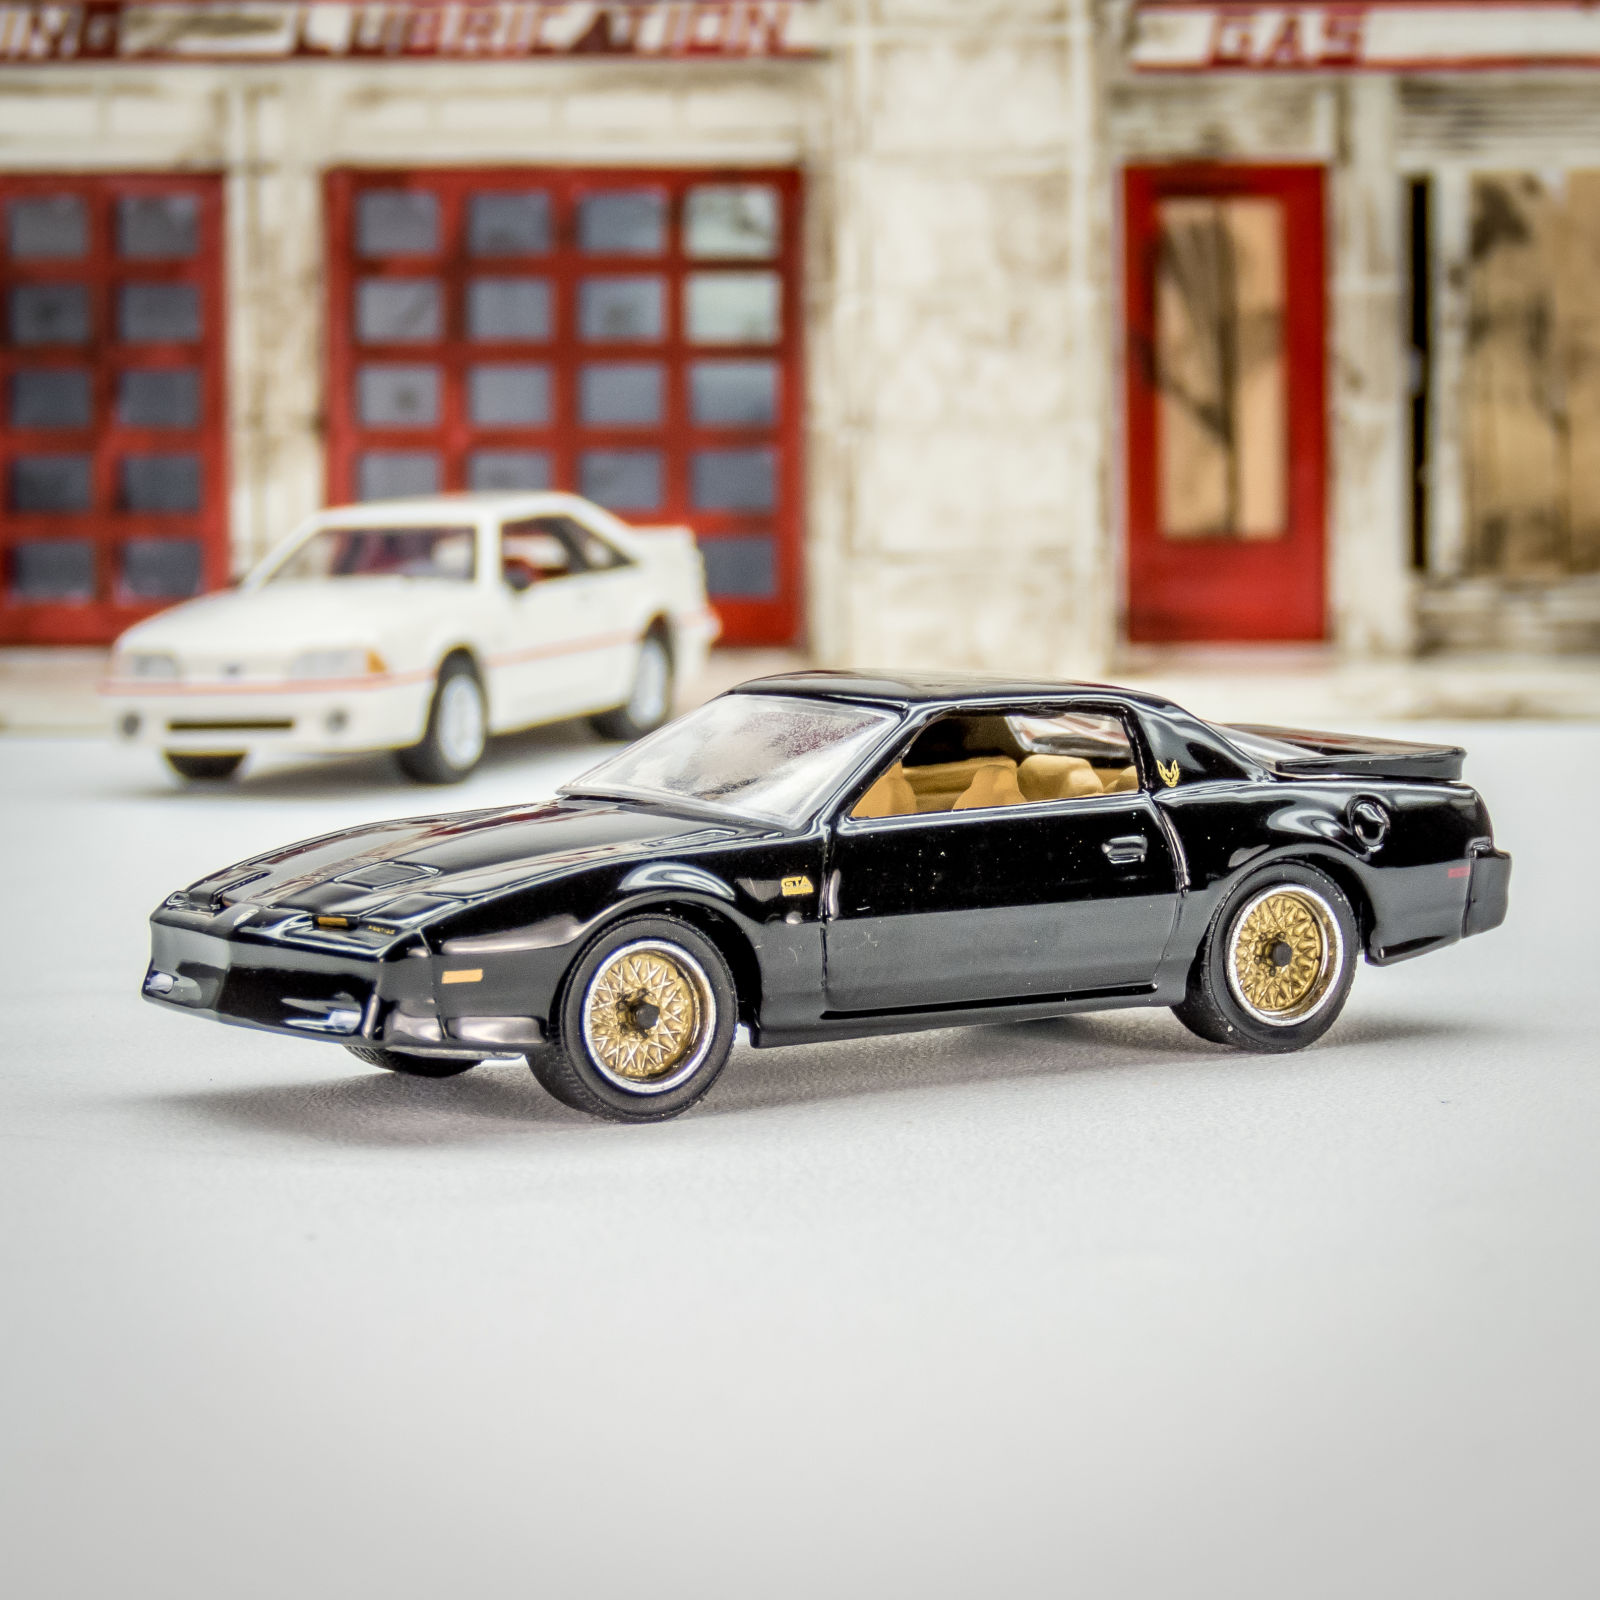 Illustration for article titled 1st attempt at a Semi Custom 1:64: GreenLight 87 Pontiac GTA, Pic Heavy Post